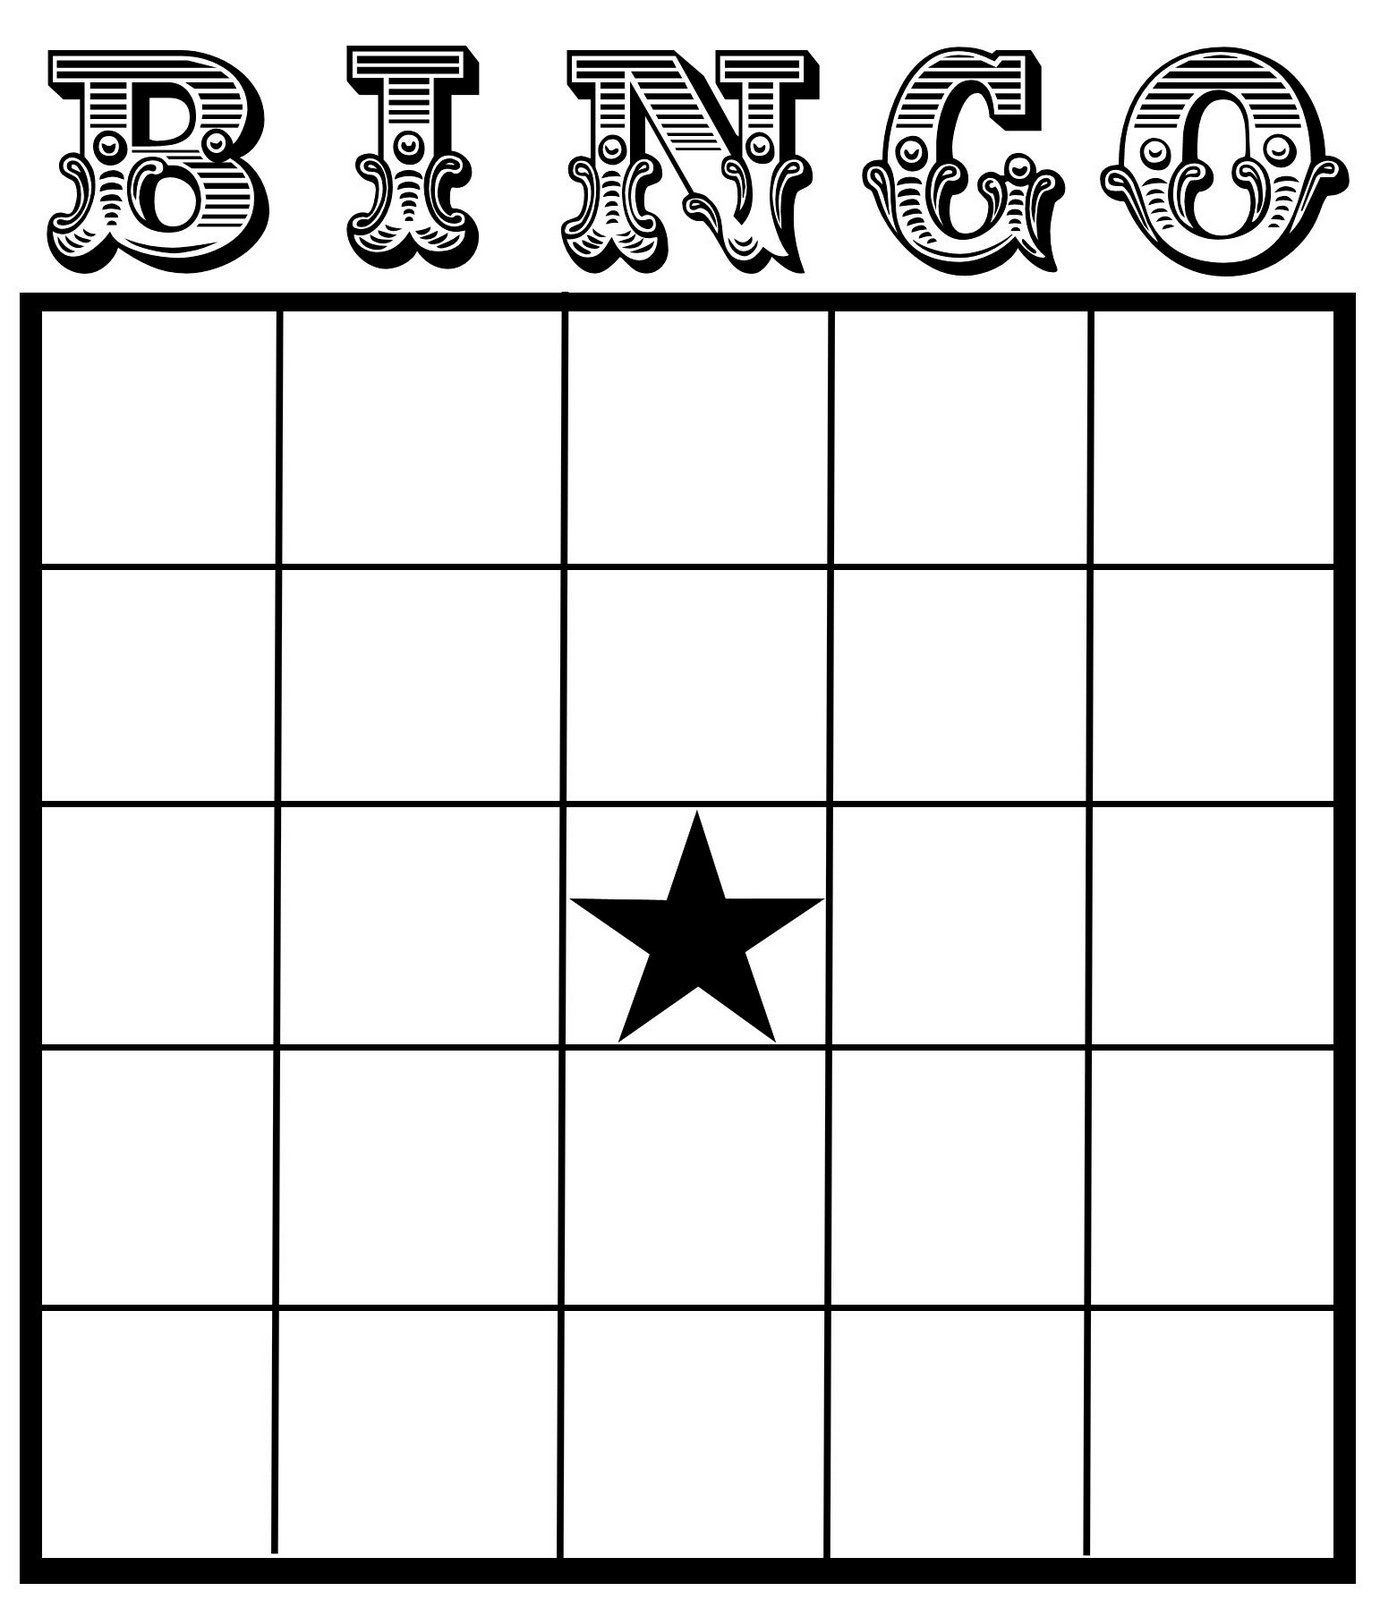 Bingo Card Printables To Share (With Images) | Bingo Card